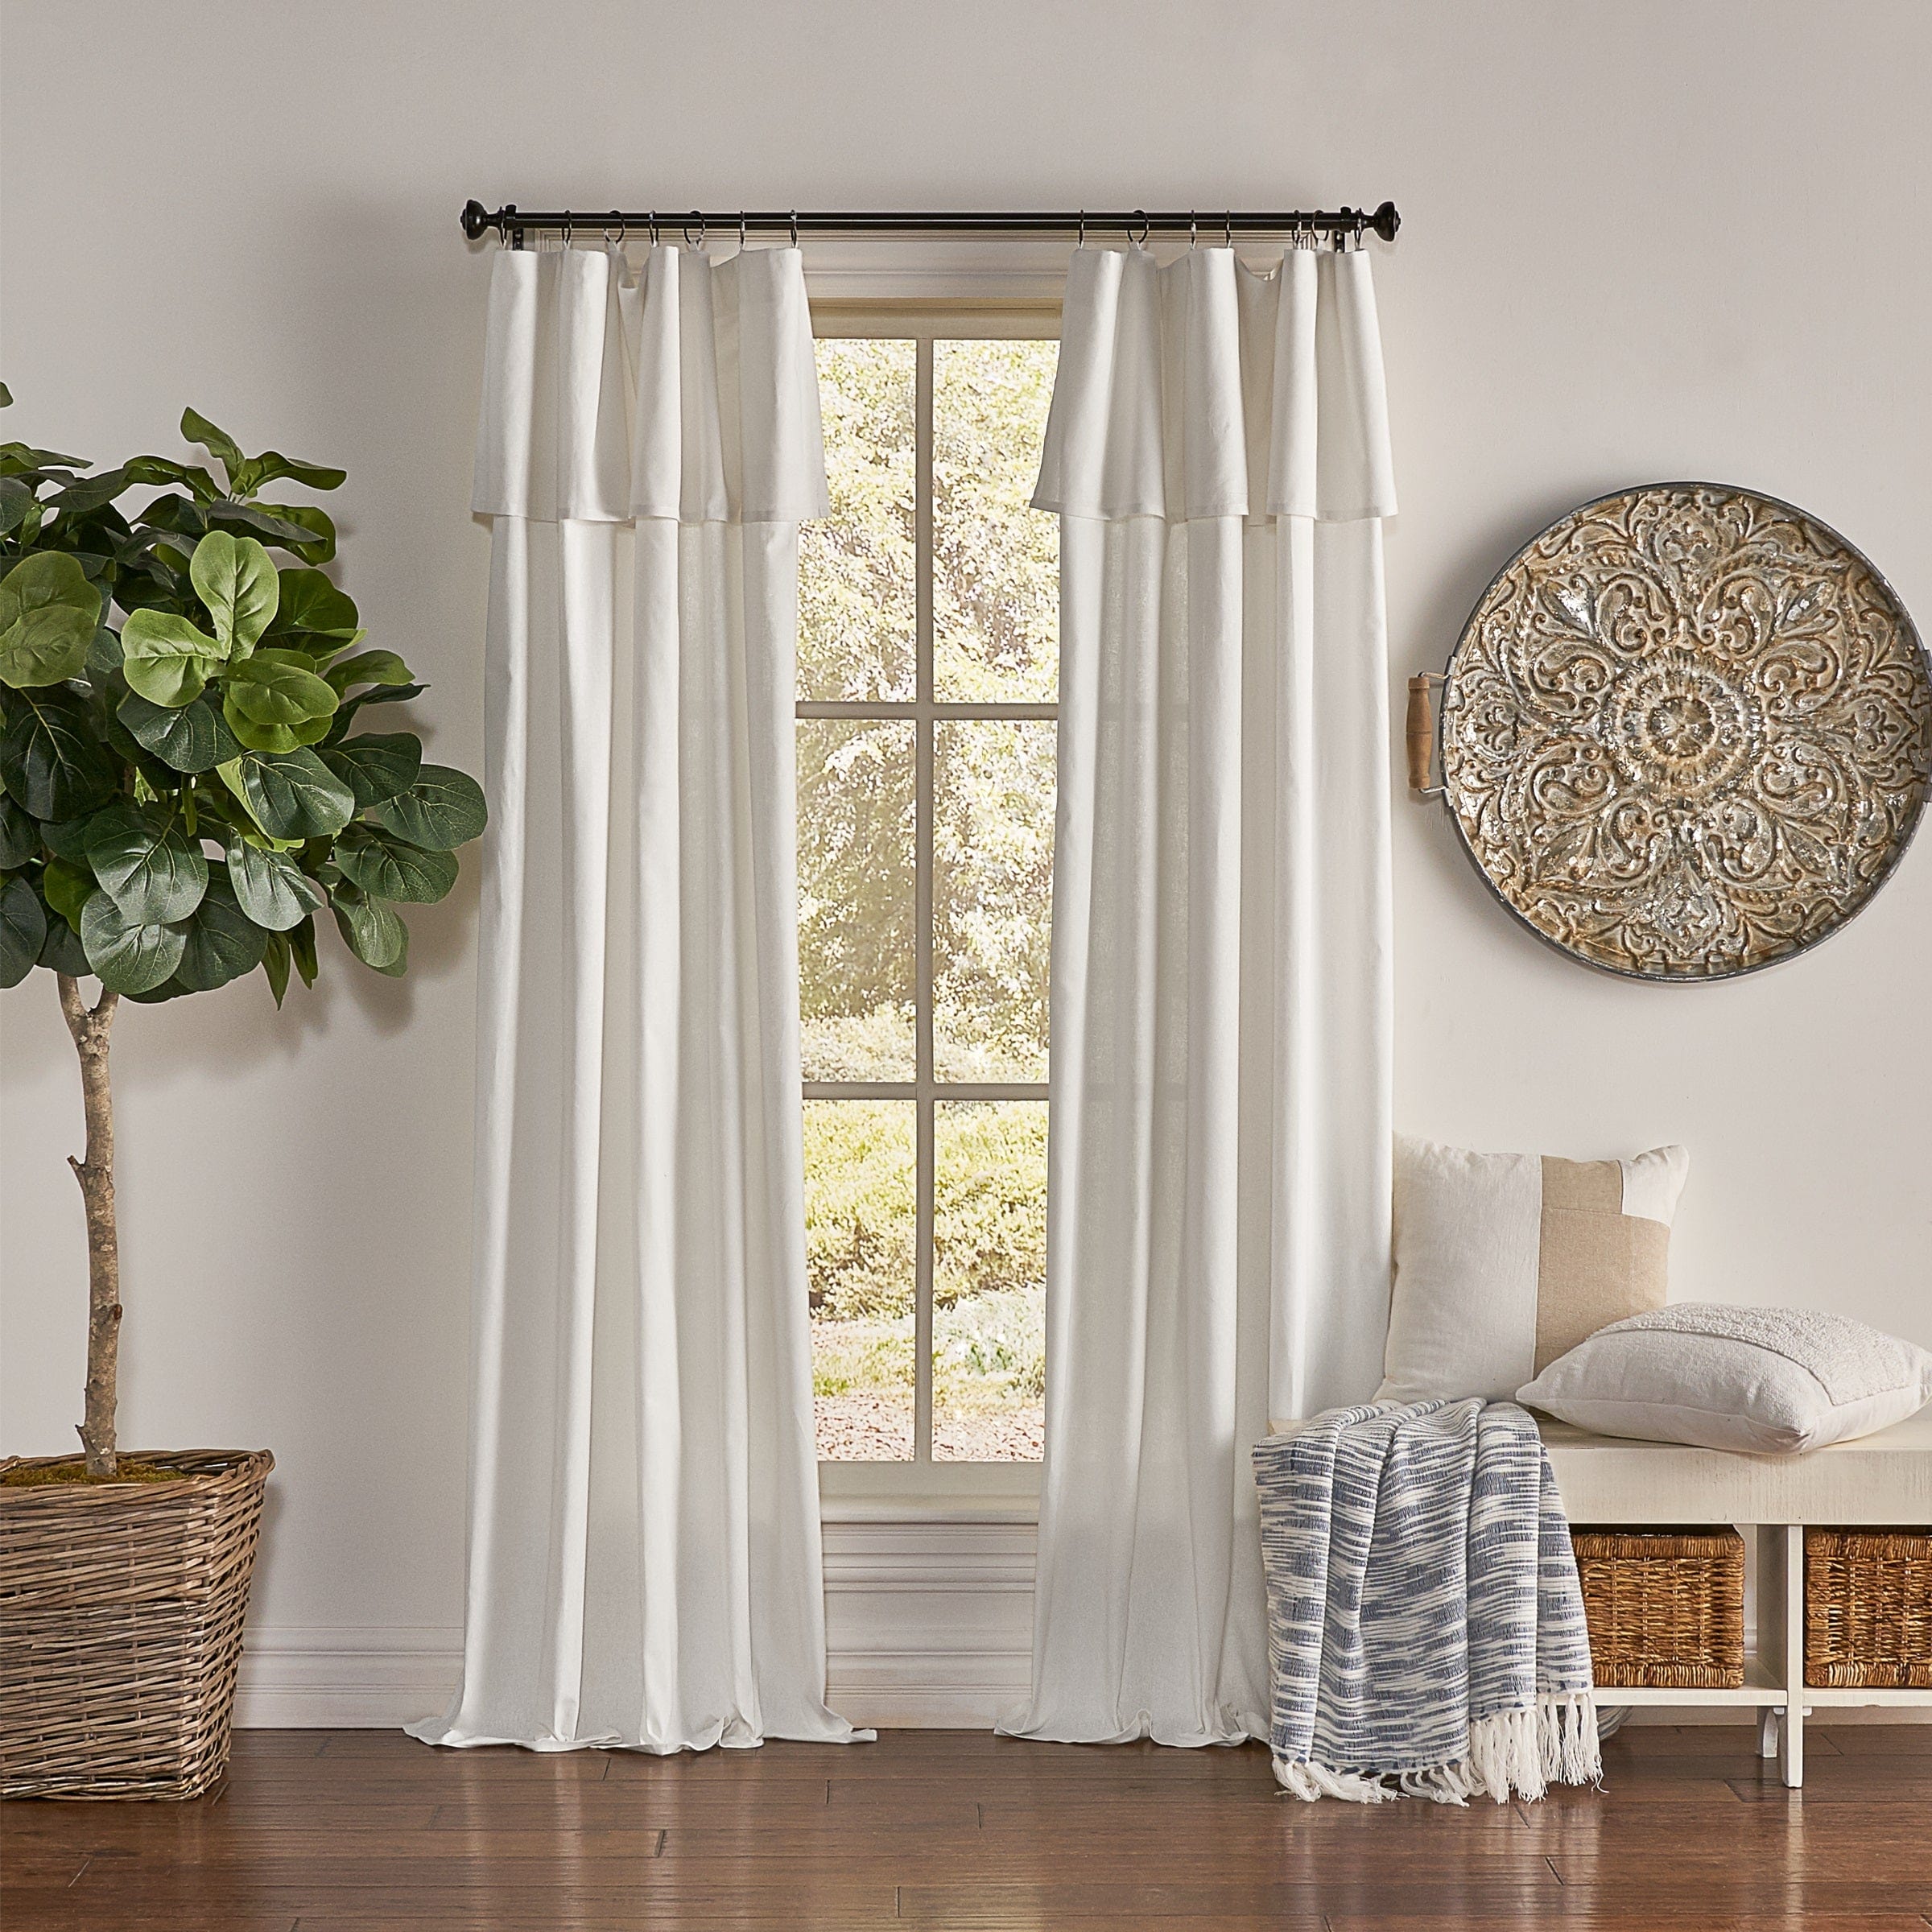 Photos - Curtains & Drapes SureFit Mercantile Drop Cloth Solid Curtain Panel with Valance in Off Whit